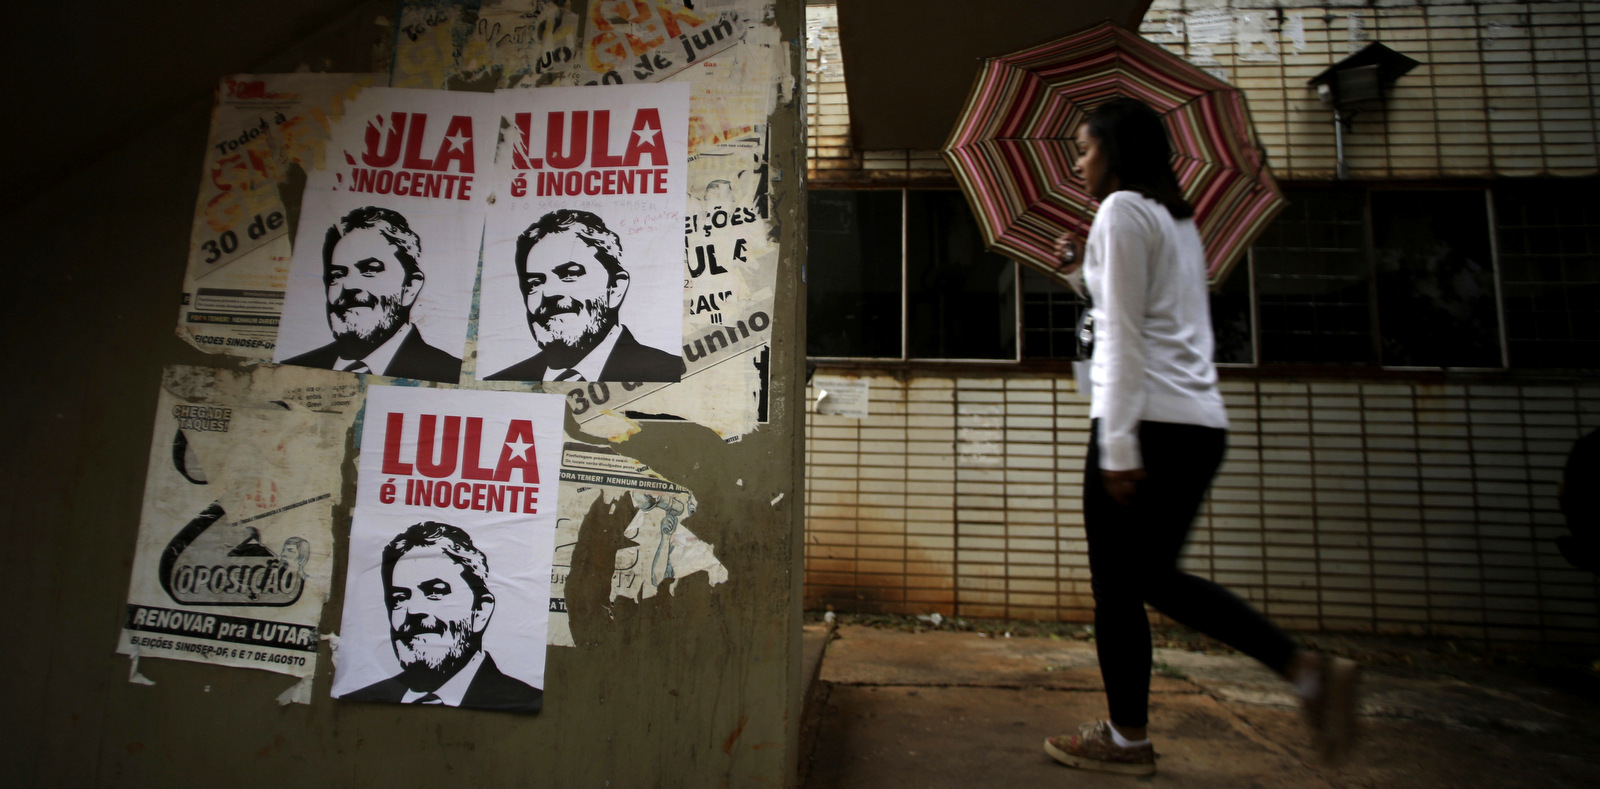 A wall displaying posters with line drawings that depict Brazil's former President Luiz Inacio Lula da Silva and a message that reads in Portuguese, “Lula is innocent”, in Brasilia, Brazil, Jan. 29, 2018. (AP/Eraldo Peres)